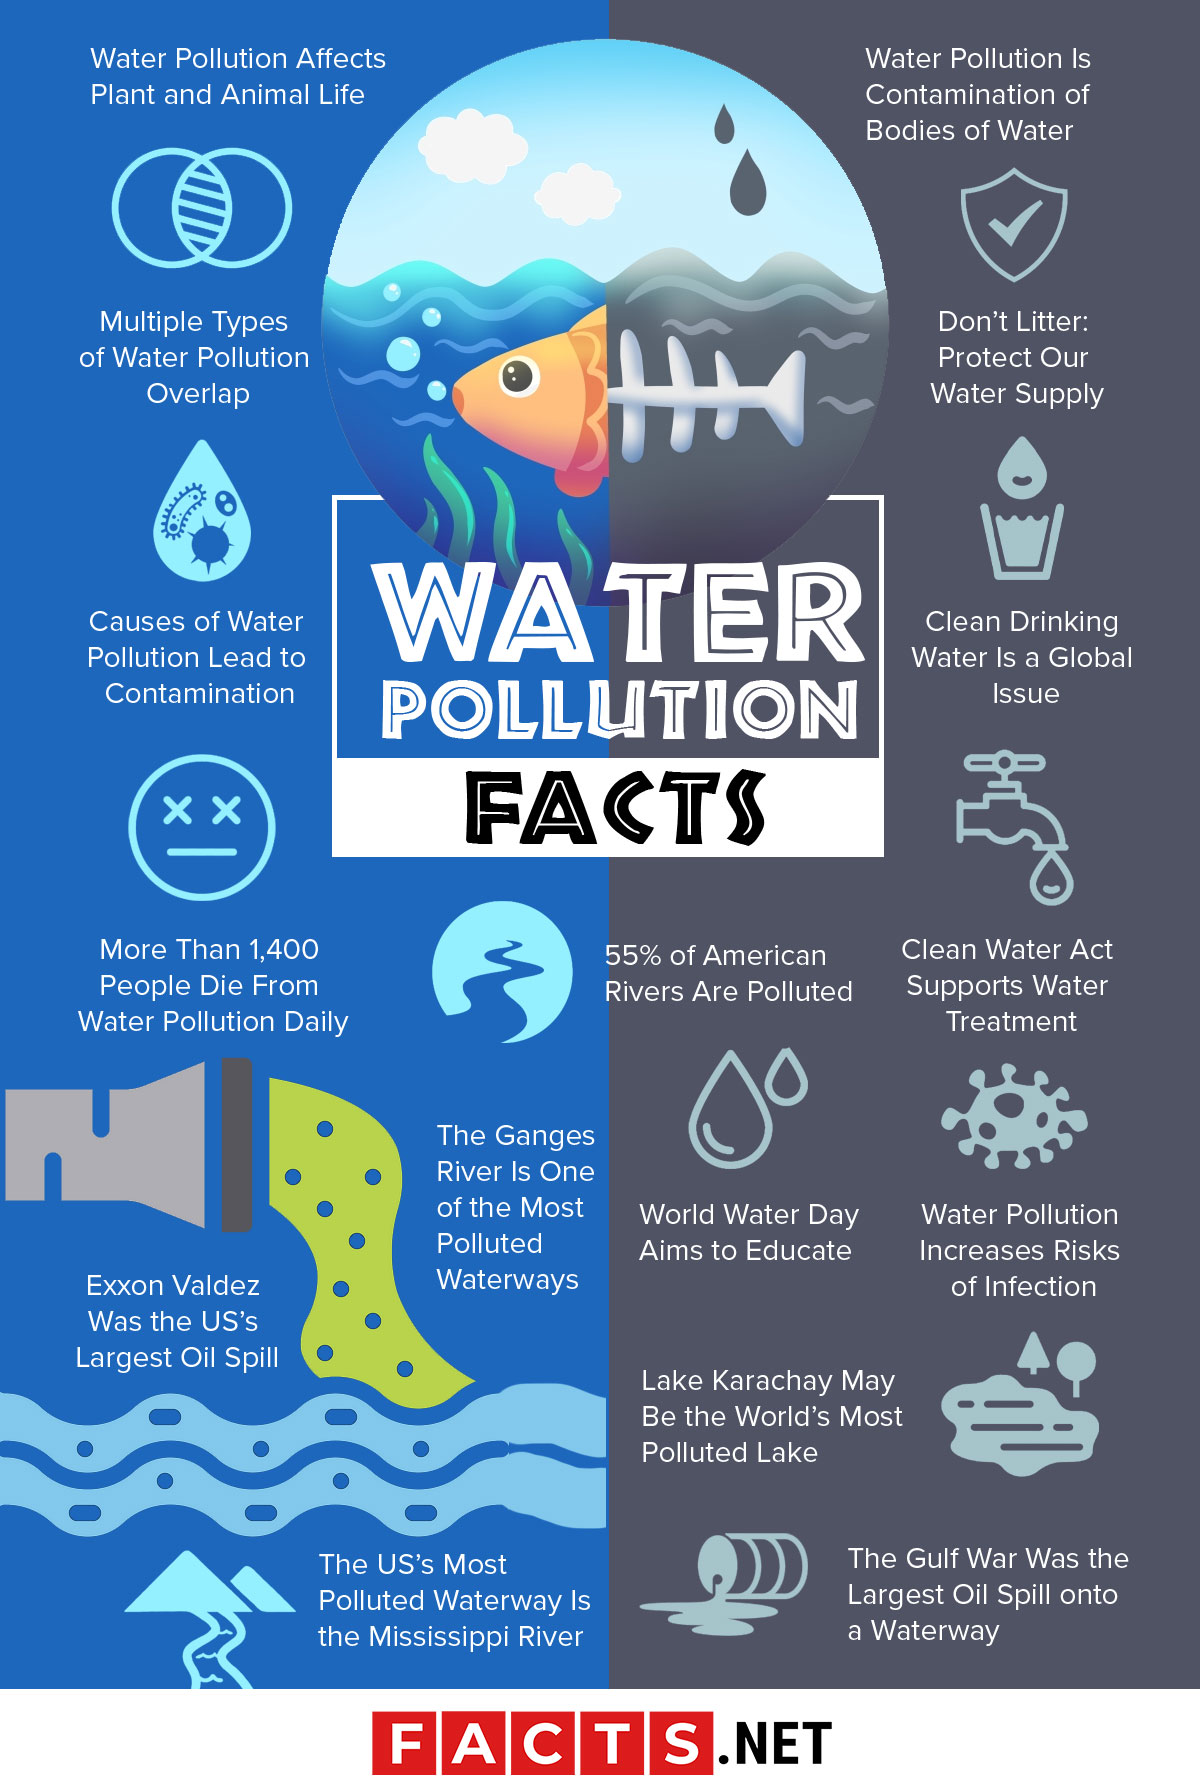 what is the conclusion for water pollution